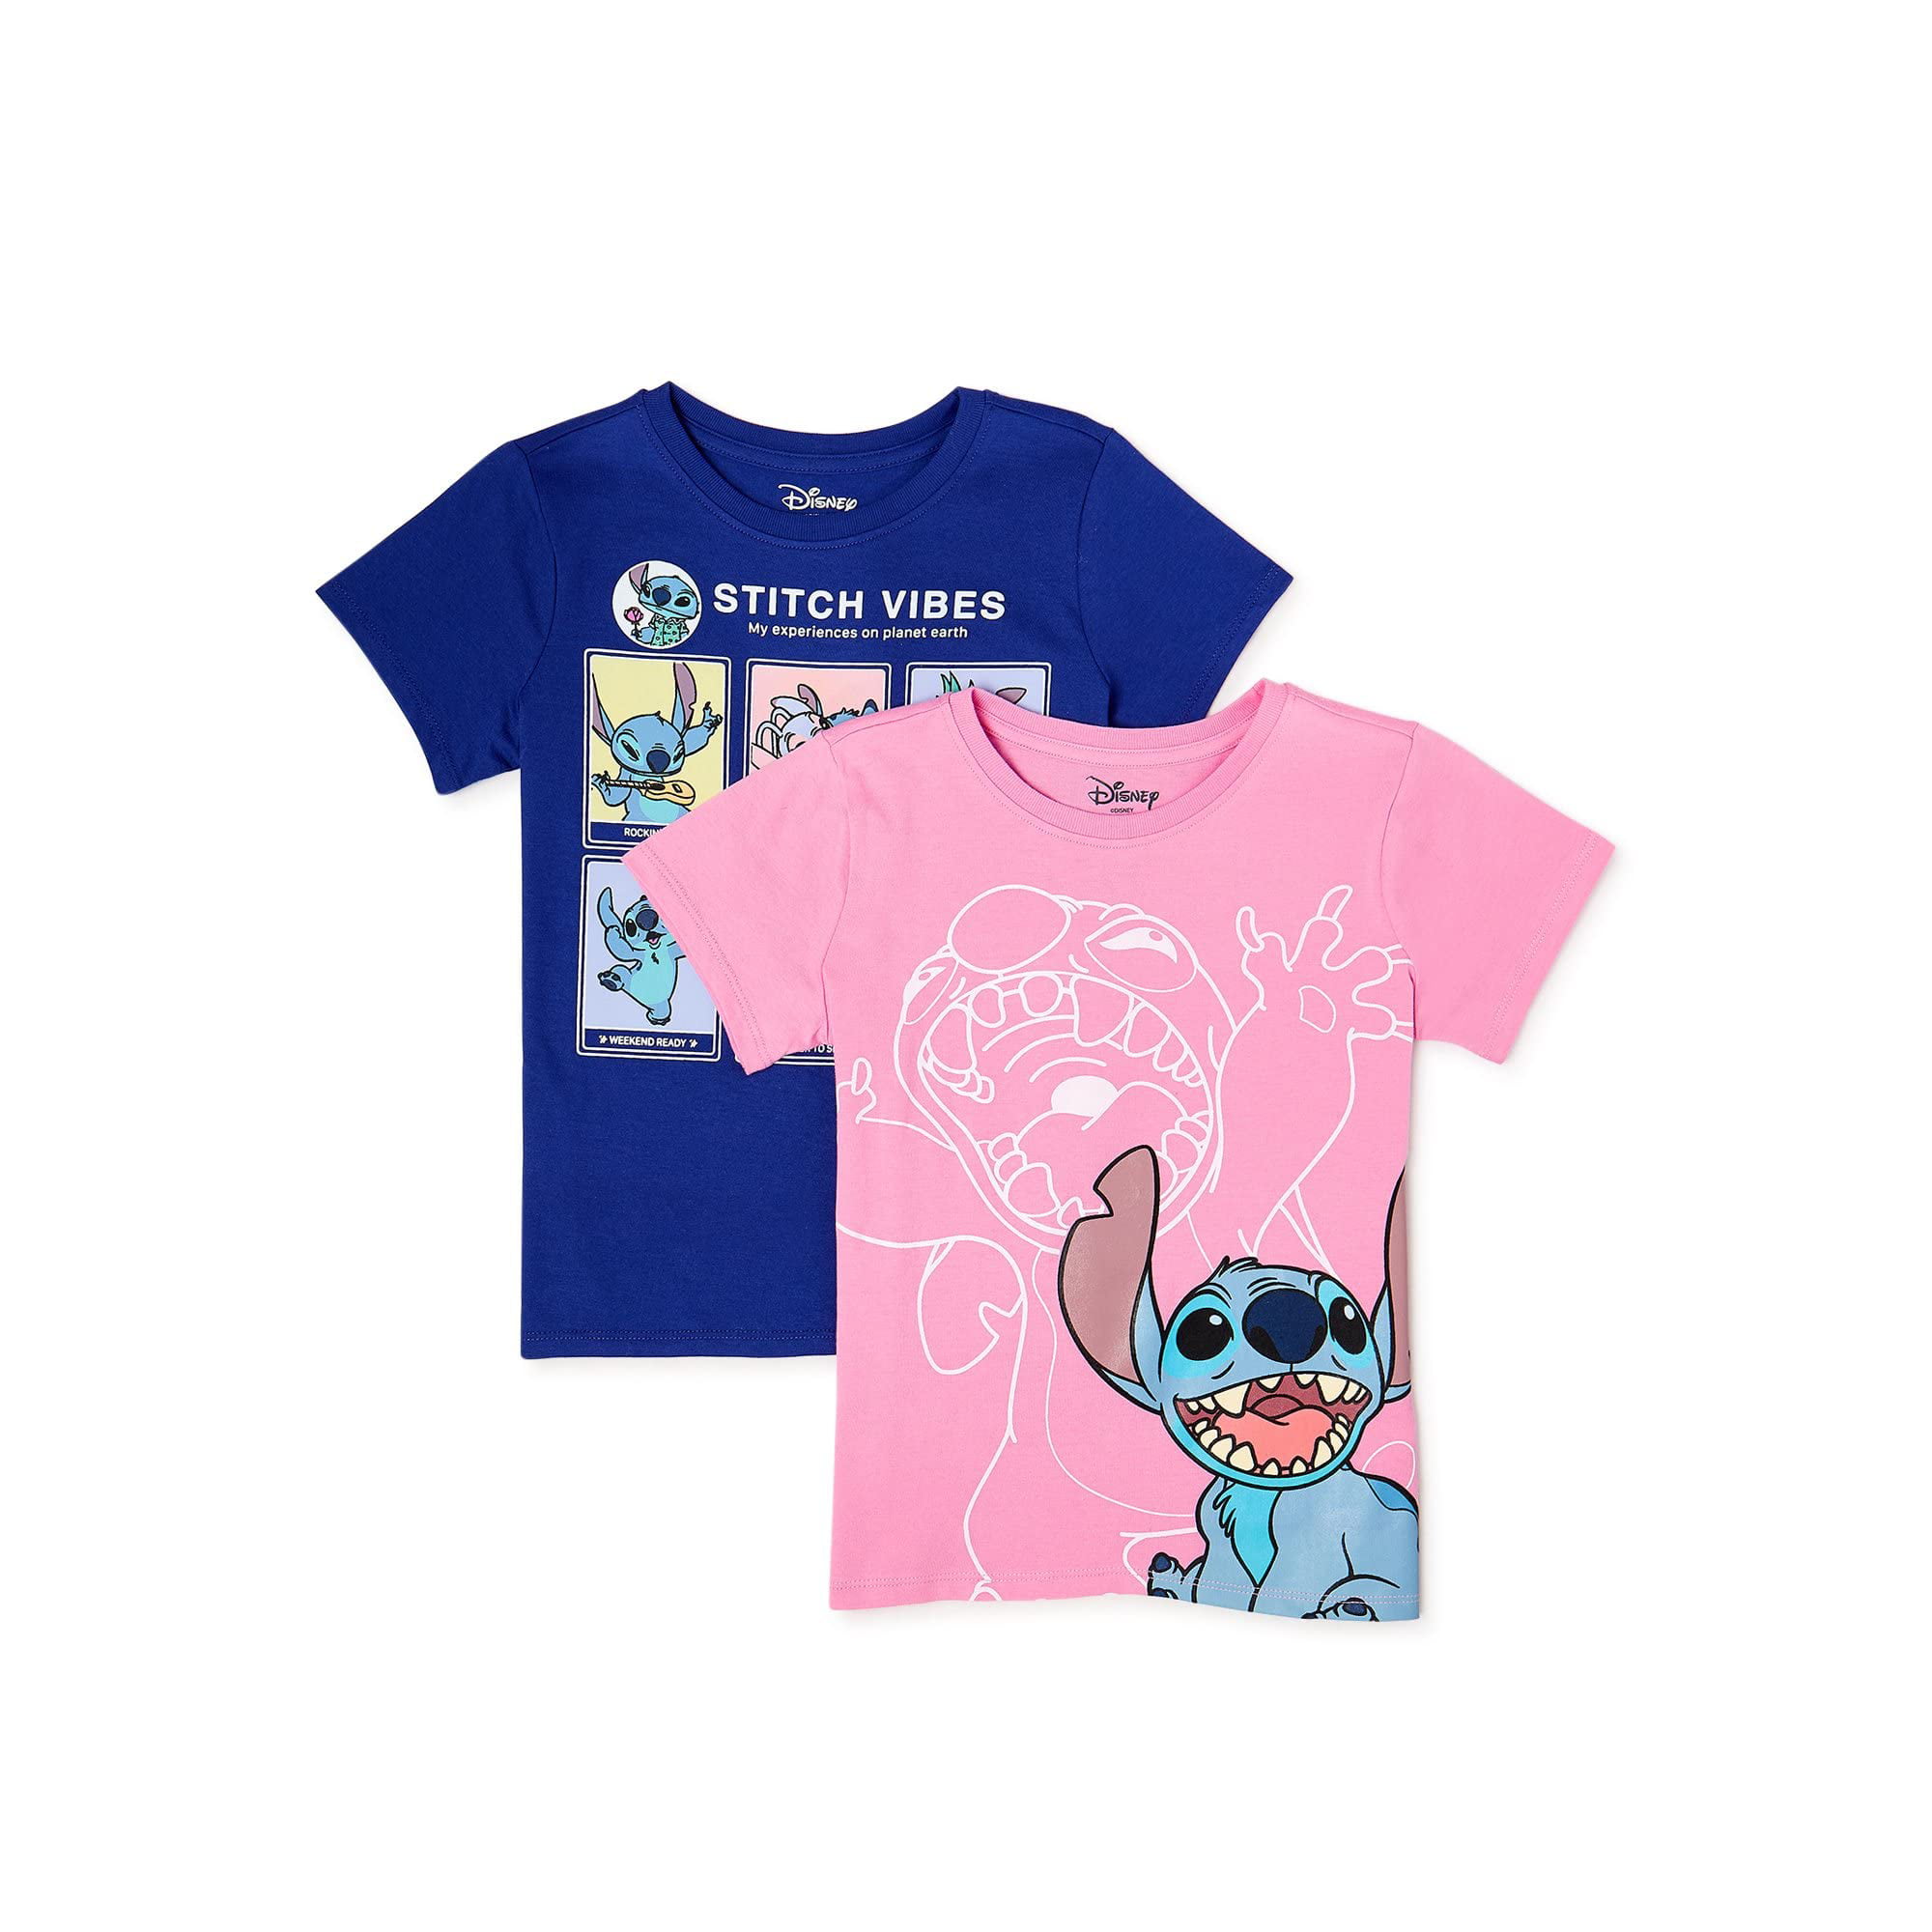 Lilo and Stitch Girls Tops and Shorts Set Four Piece Mix and Match 